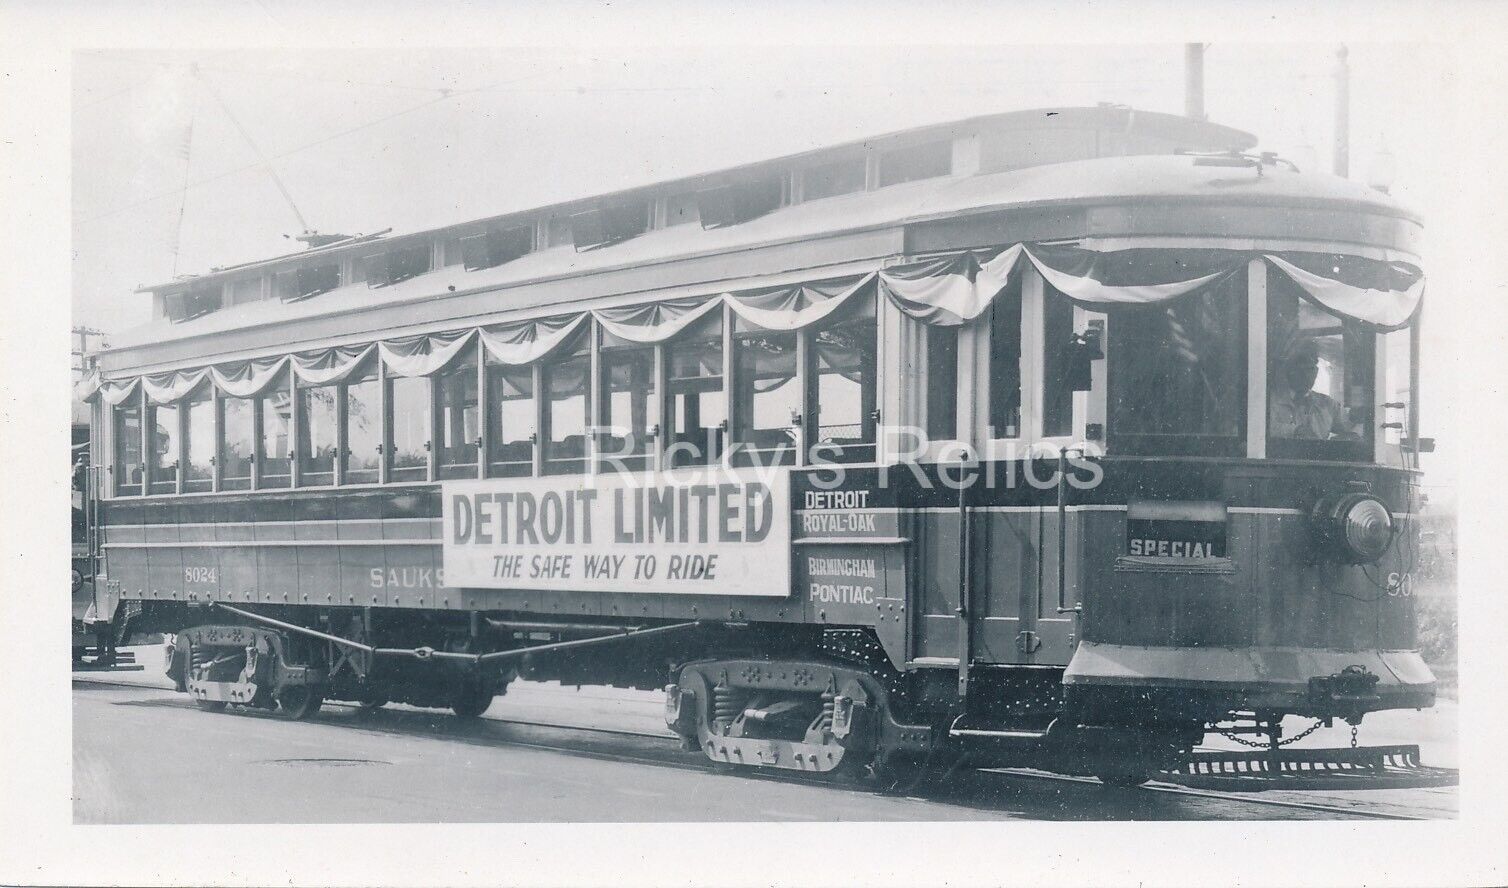 B&W Photo #8024 Detroit United RR 1930’s Streetcar Detroit Limited Special